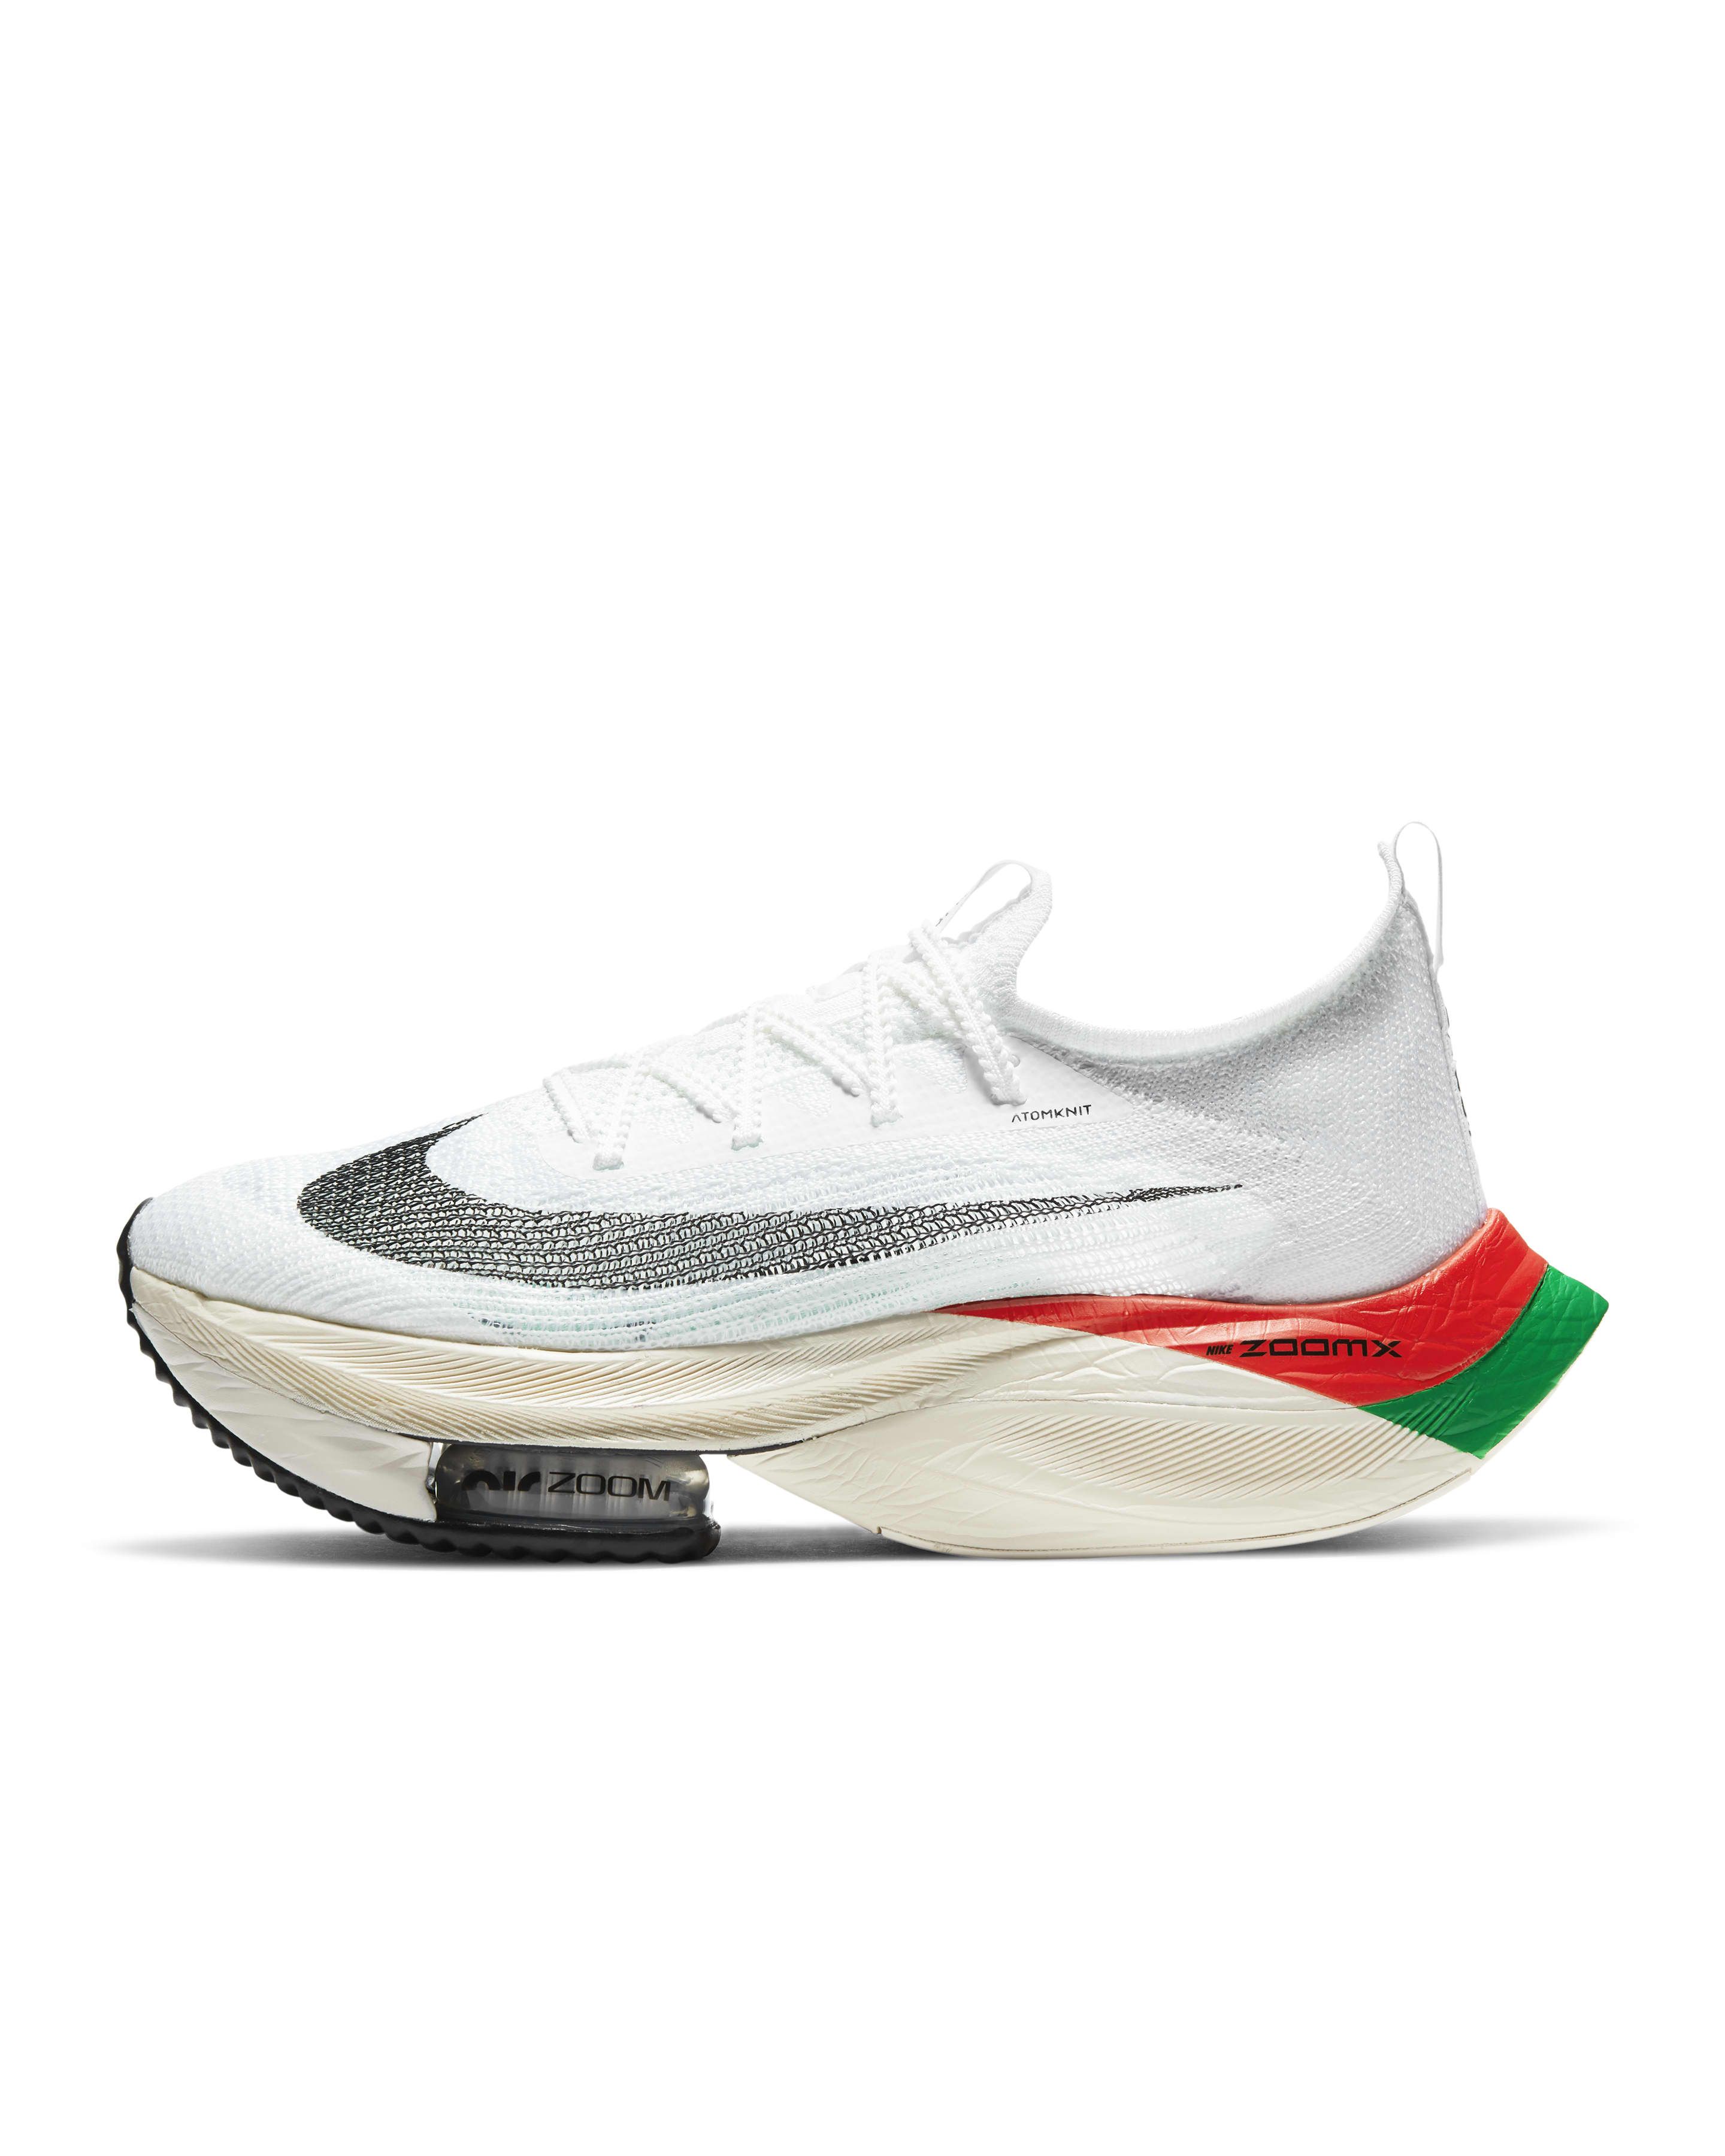 Running shoes Nike Air Zoom Alphafly Next% Eliud Kipchoge - Top4Running.com